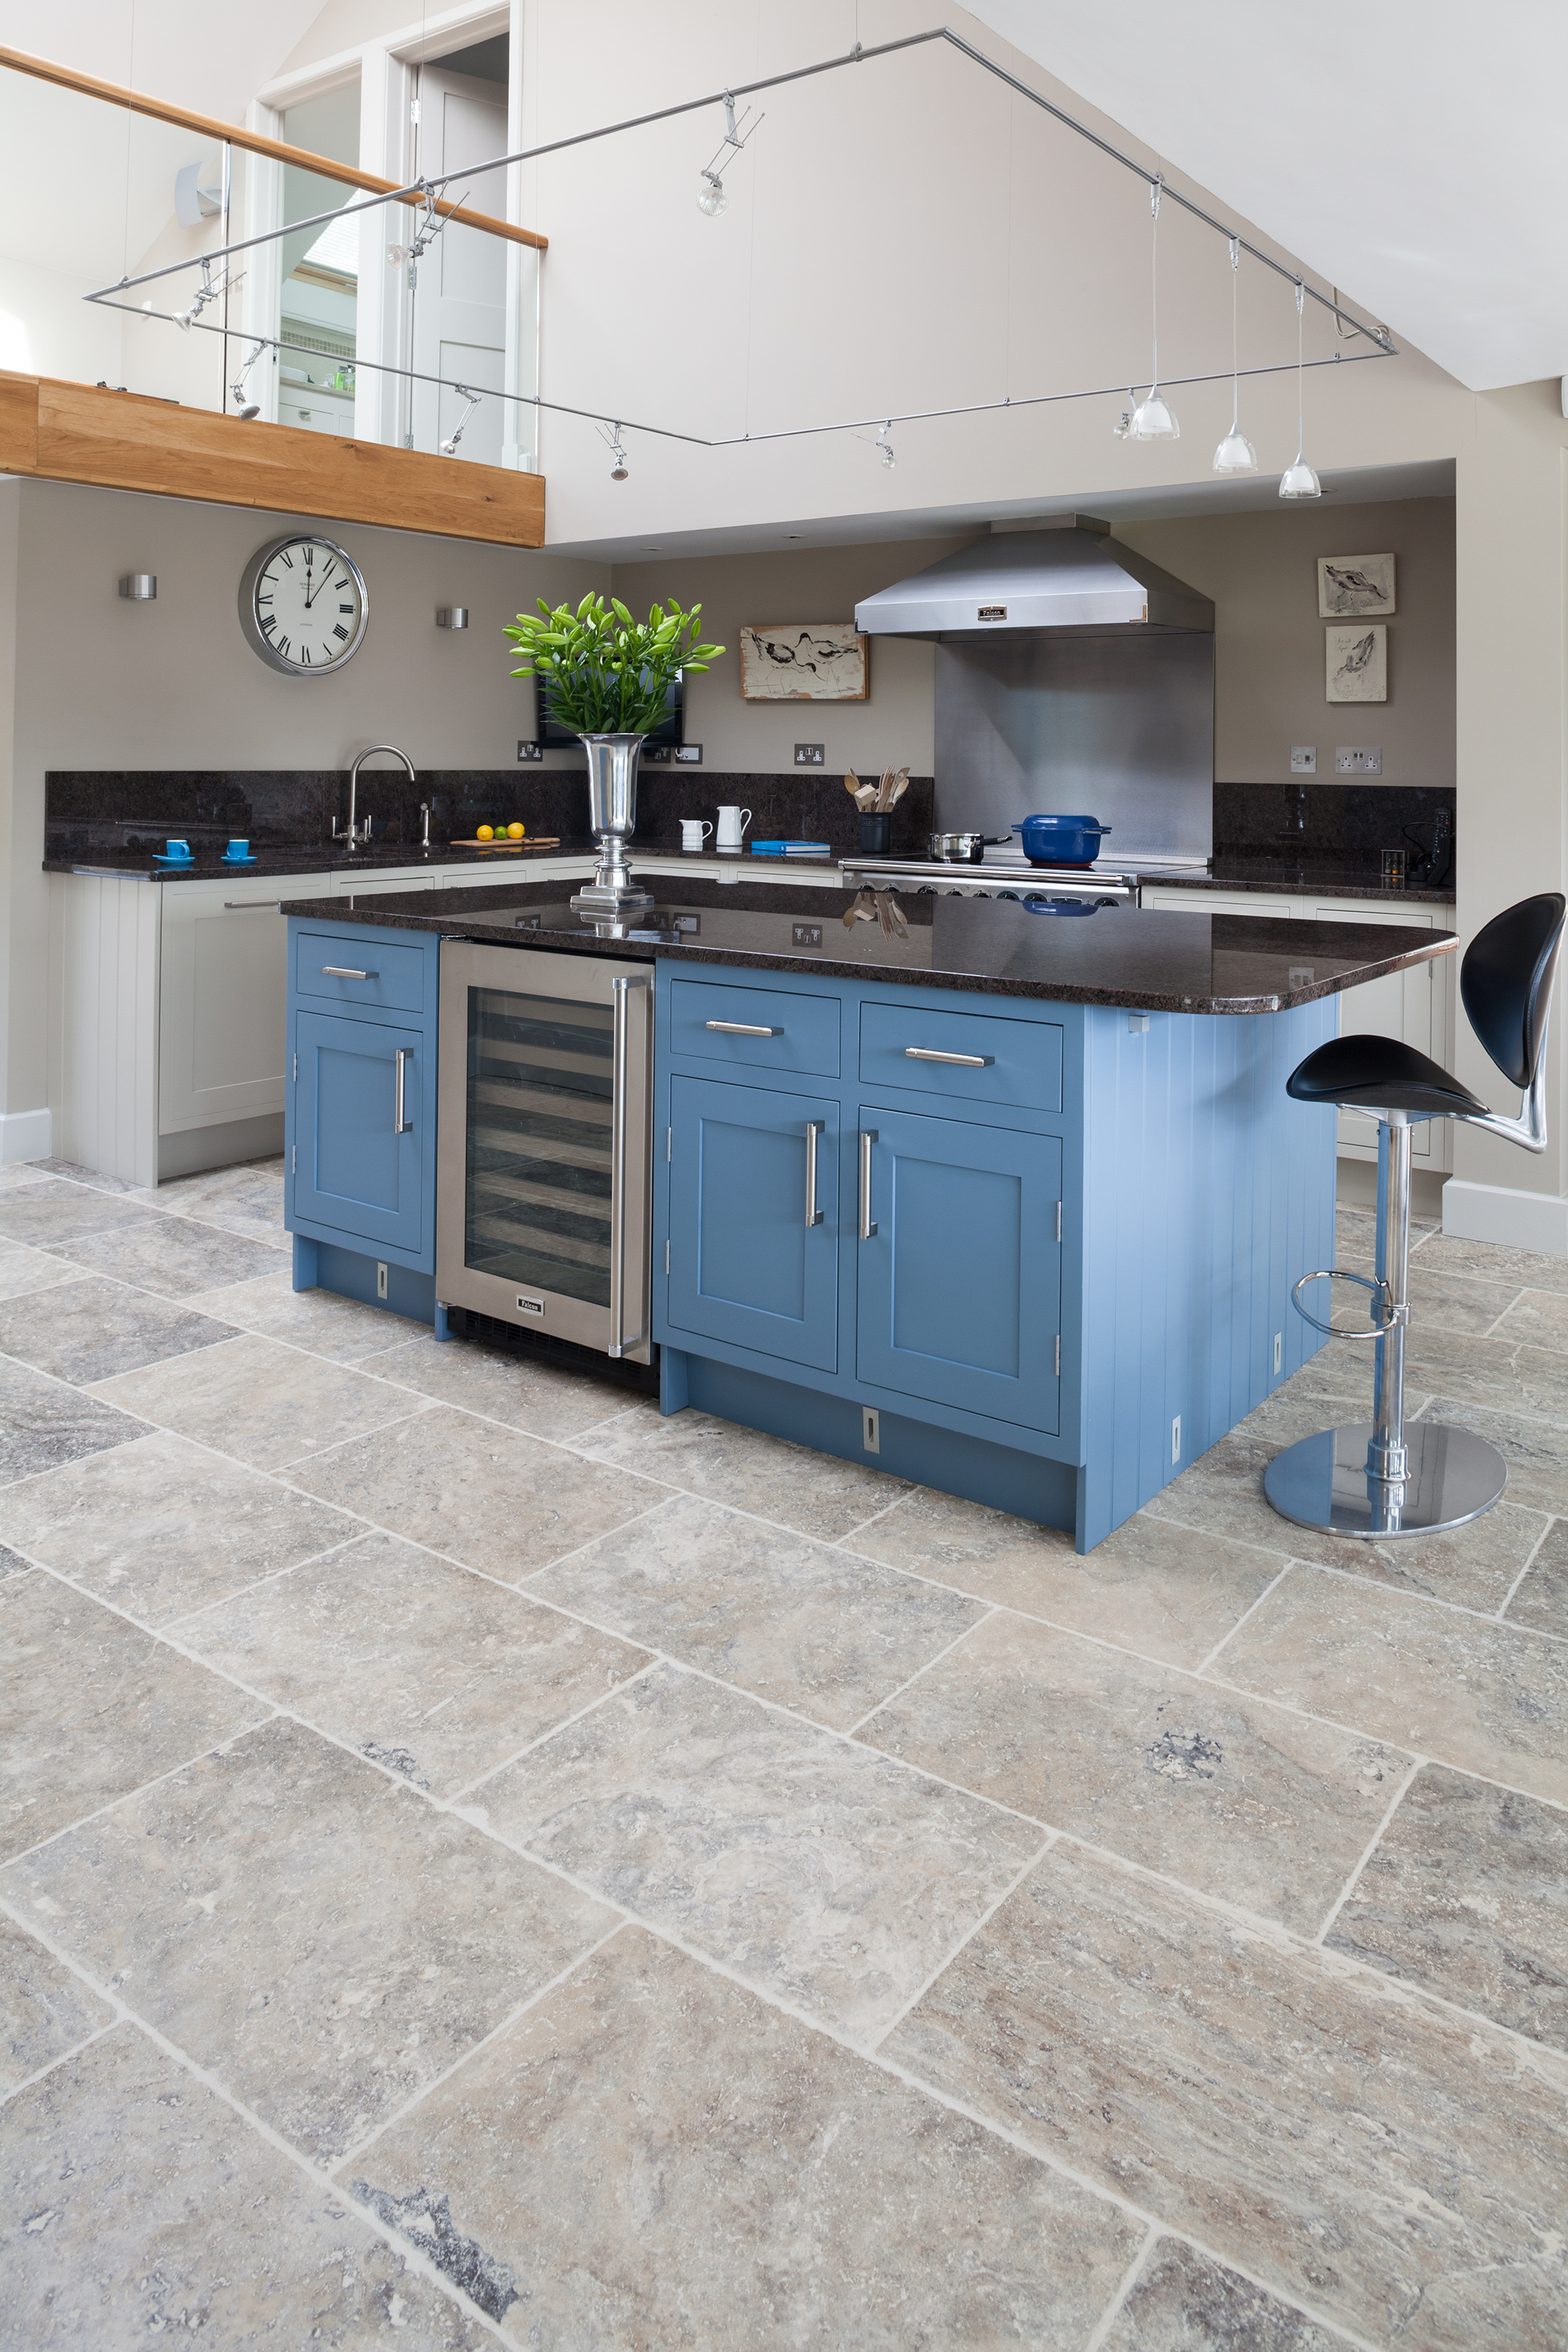 Blue kitchen cabinets and stone flooring